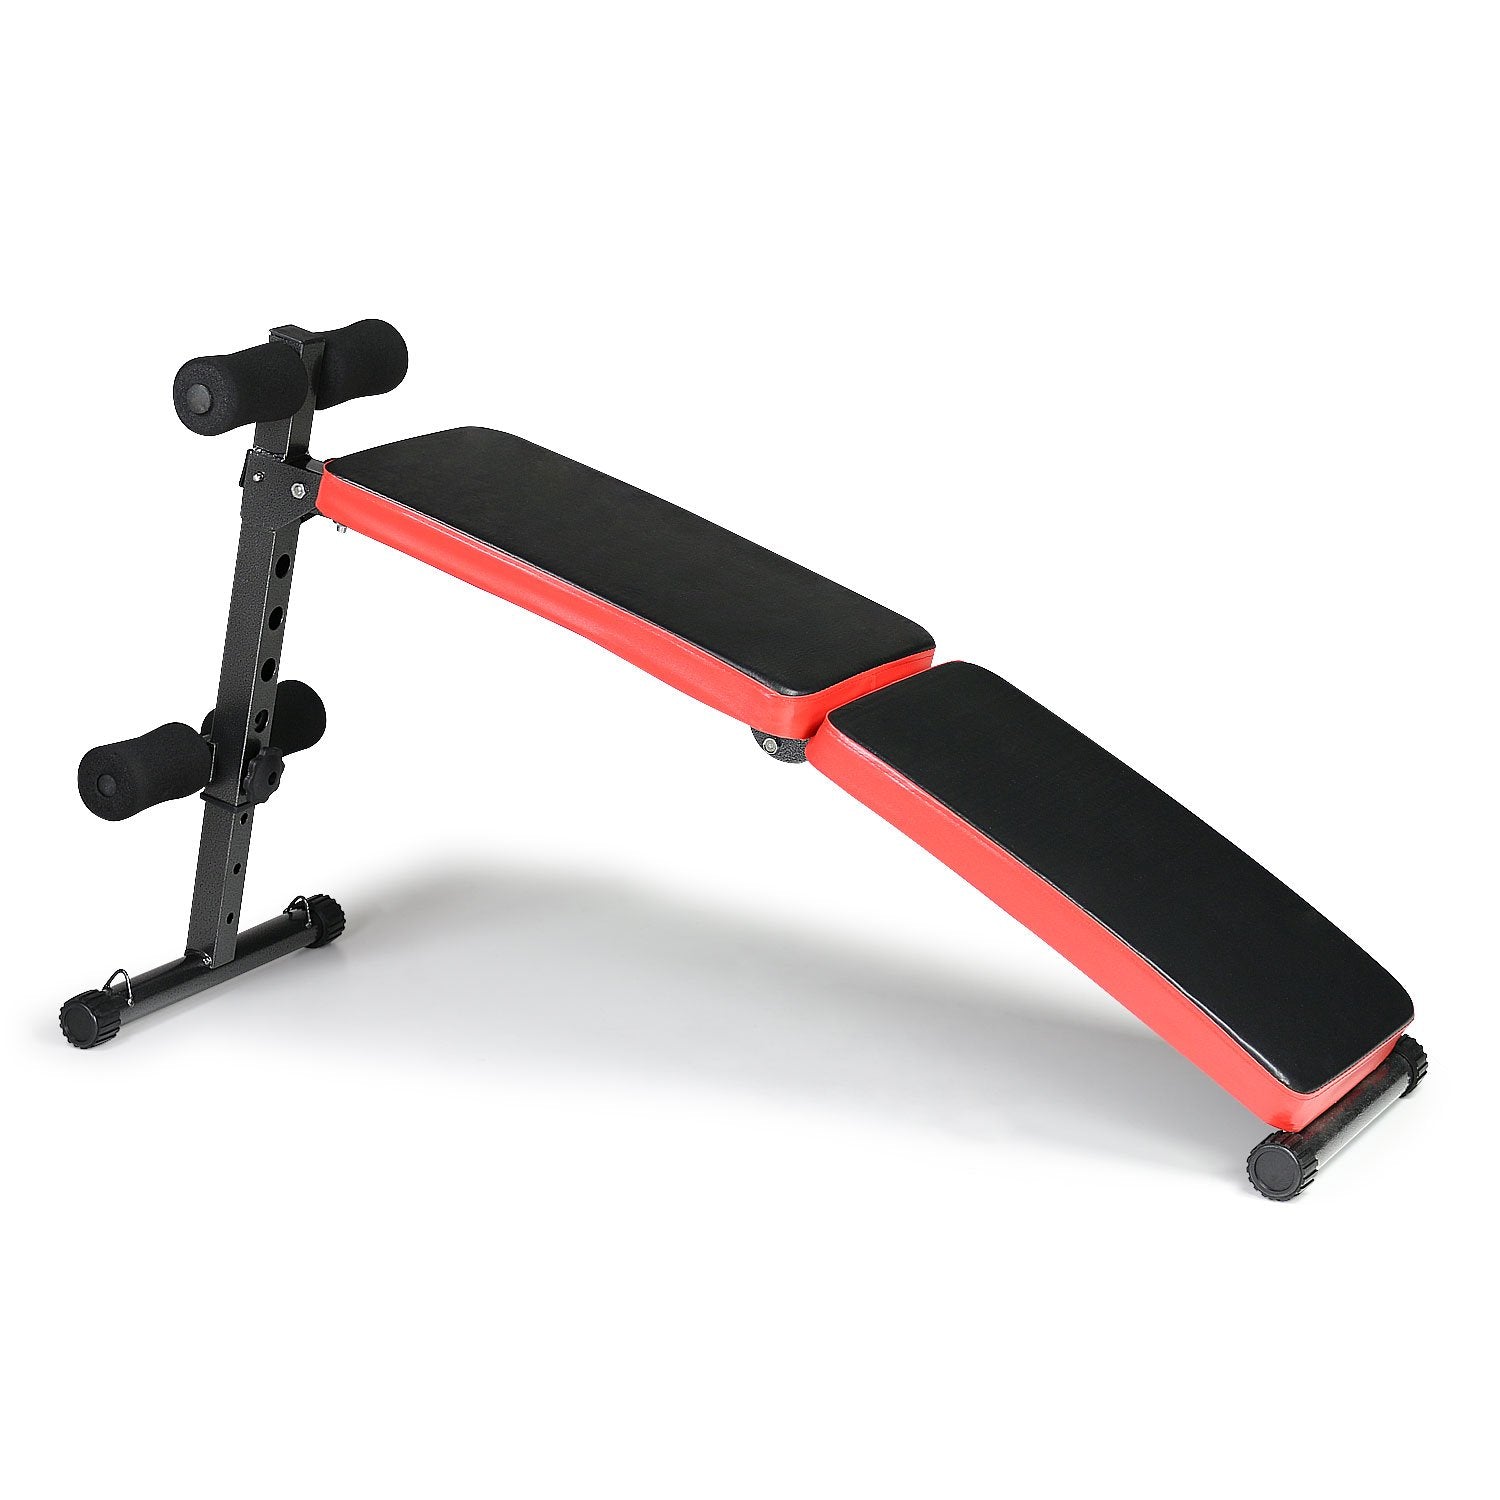 Powertrain Inclined Sit up bench with Resistance bands - SILBERSHELL